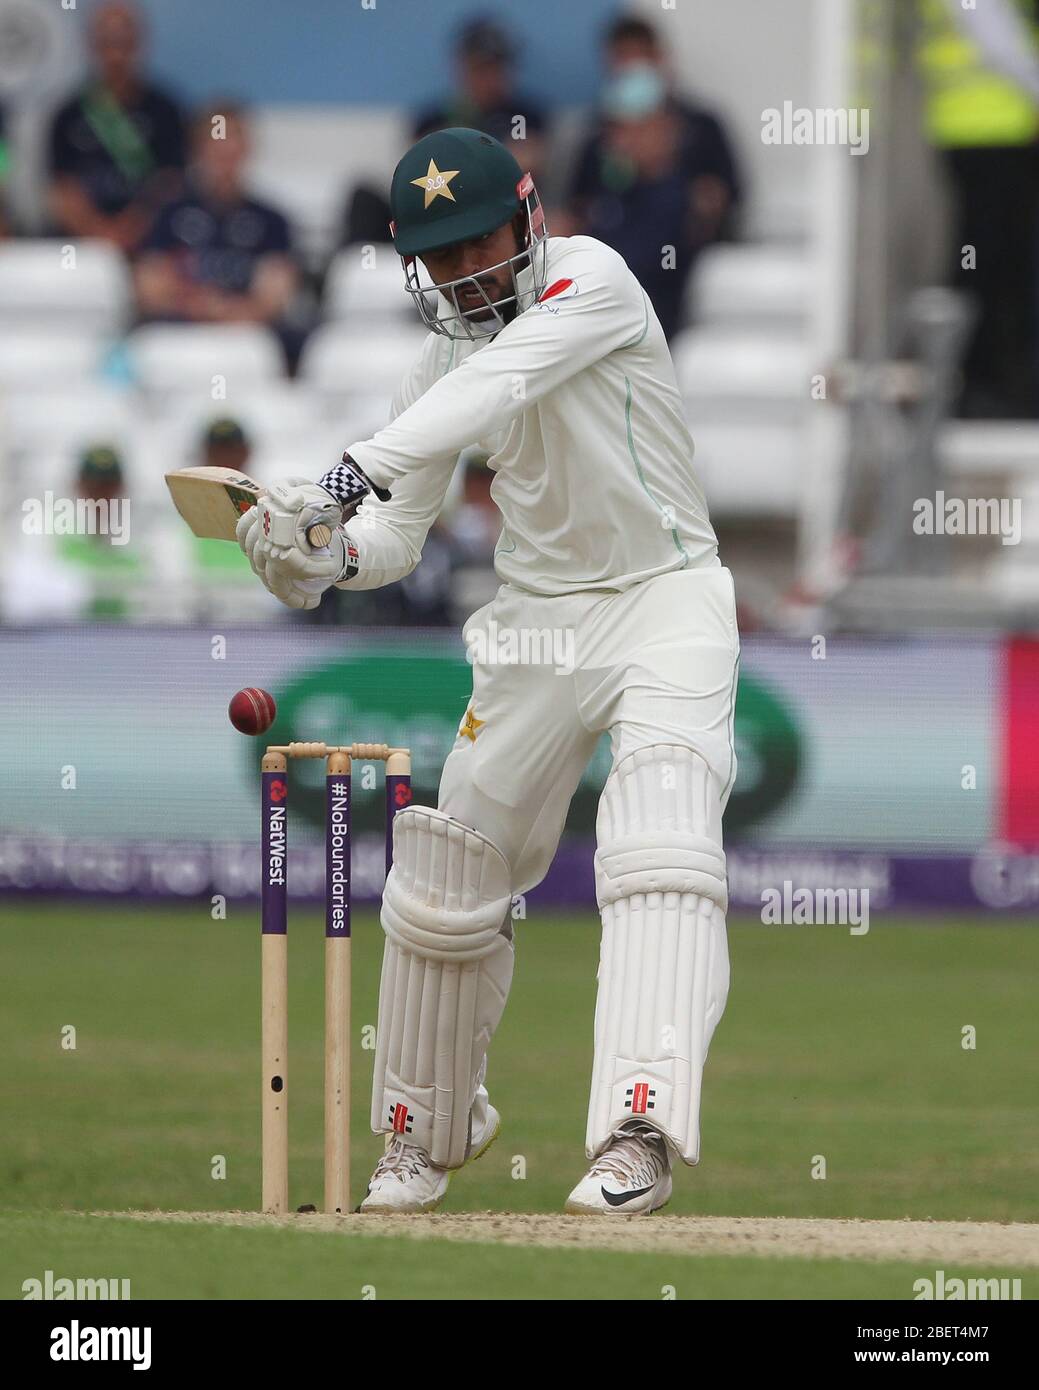 LEEDS, UK - JUNE 1ST Hasan Ali of Pakistan during the first day of the Second Nat West Test match between England and Pakistan at Headingley Cricket Ground, Leeds on Friday 1st June 2018. (Credit: Mark Fletcher | MI News) Stock Photo